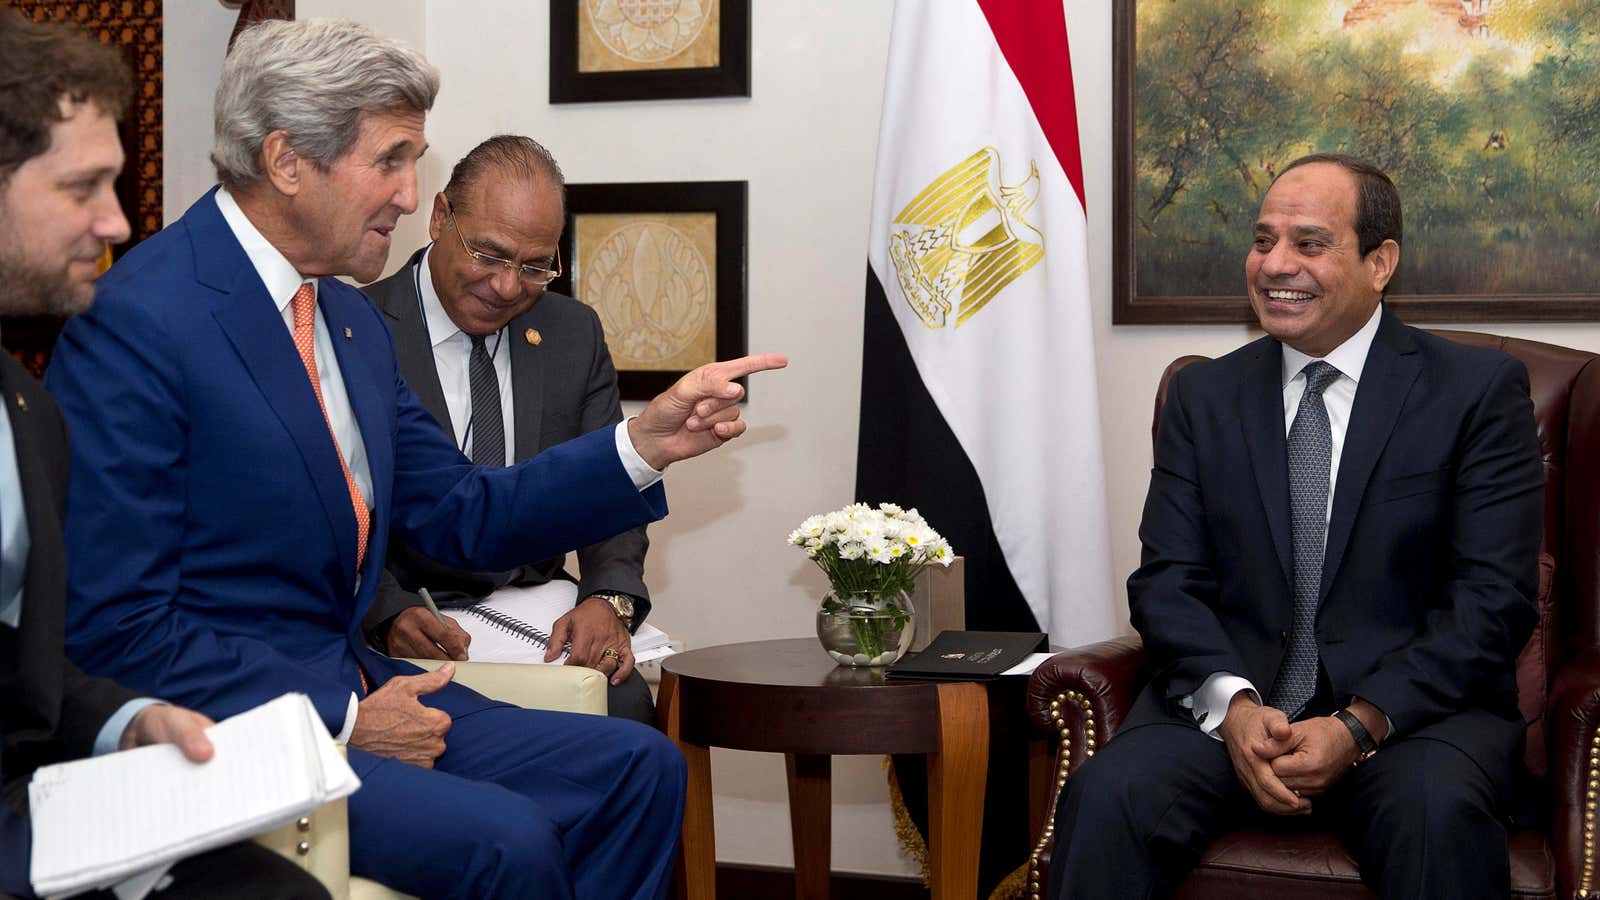 US climate envoy John Kerry, shown here during a 2016 meeting with Egyptian president Abdel Fattah al-Sisi, is asking developing countries to walk a delicate balance between fighting climate change and pursuing economic development.